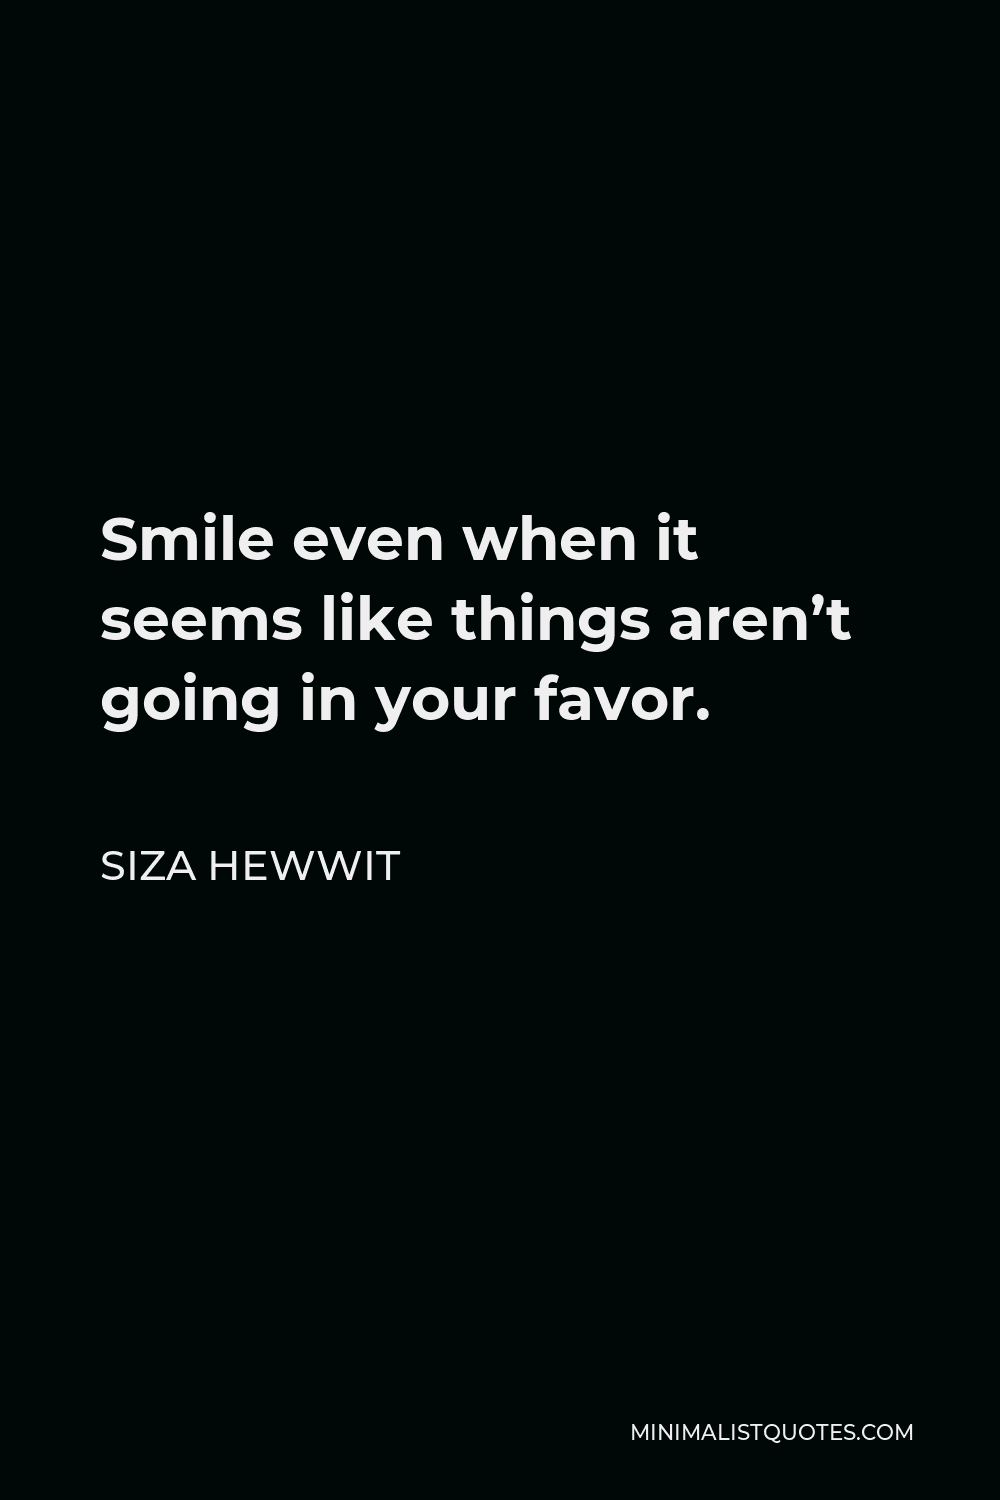 Siza Hewwit Quote - Smile even when it seems like things aren’t going in your favor.